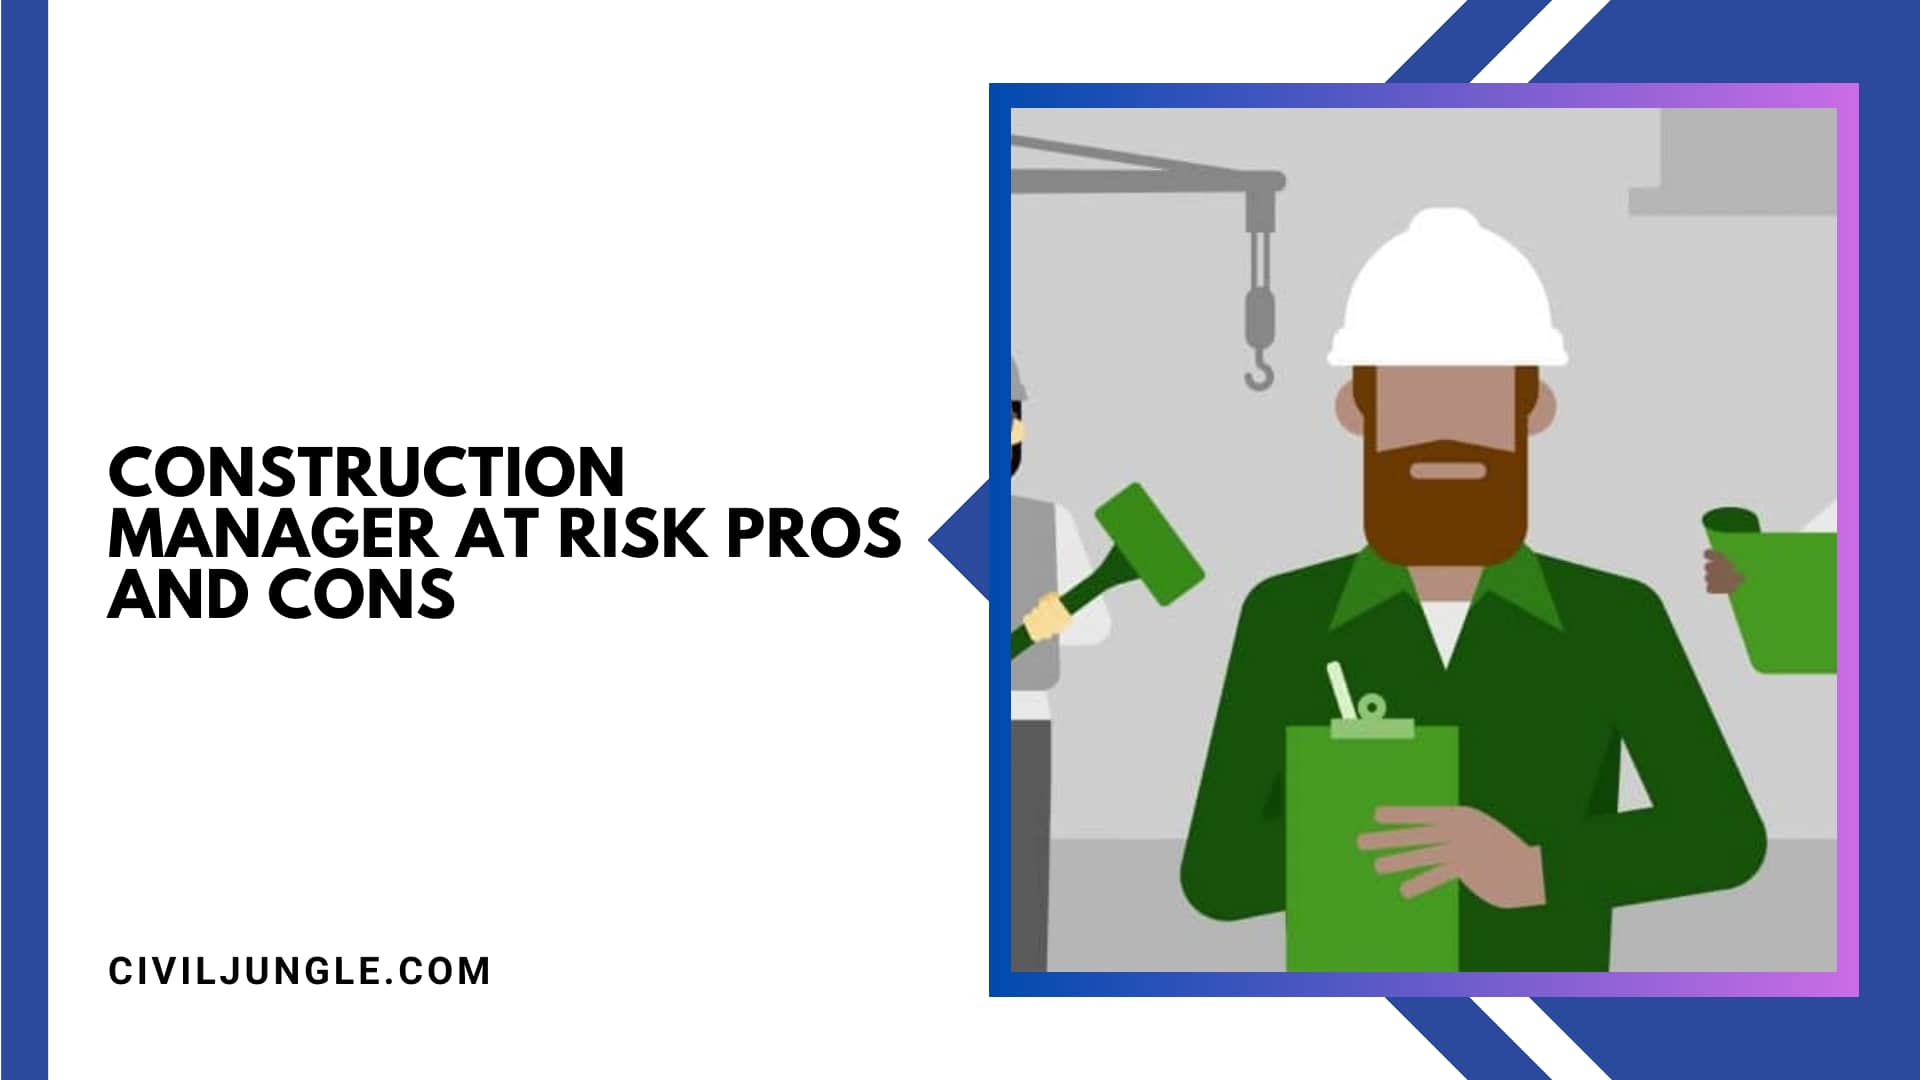 Construction Manager at Risk Pros and Cons